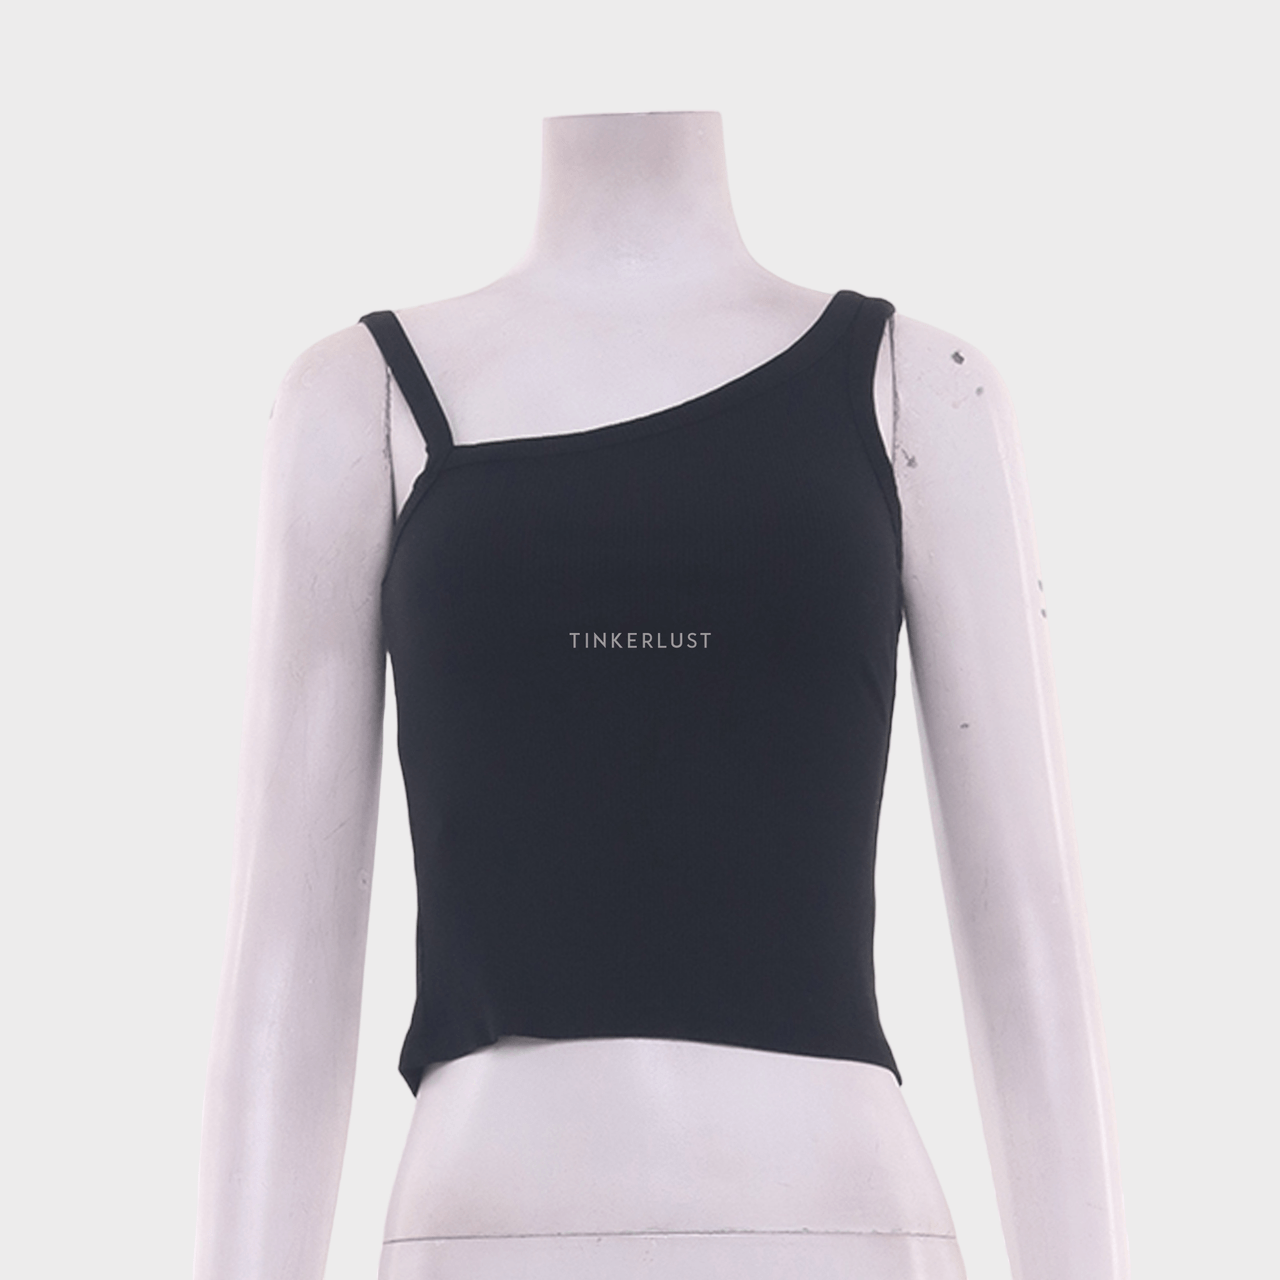 Private Collection Black Sleeveless